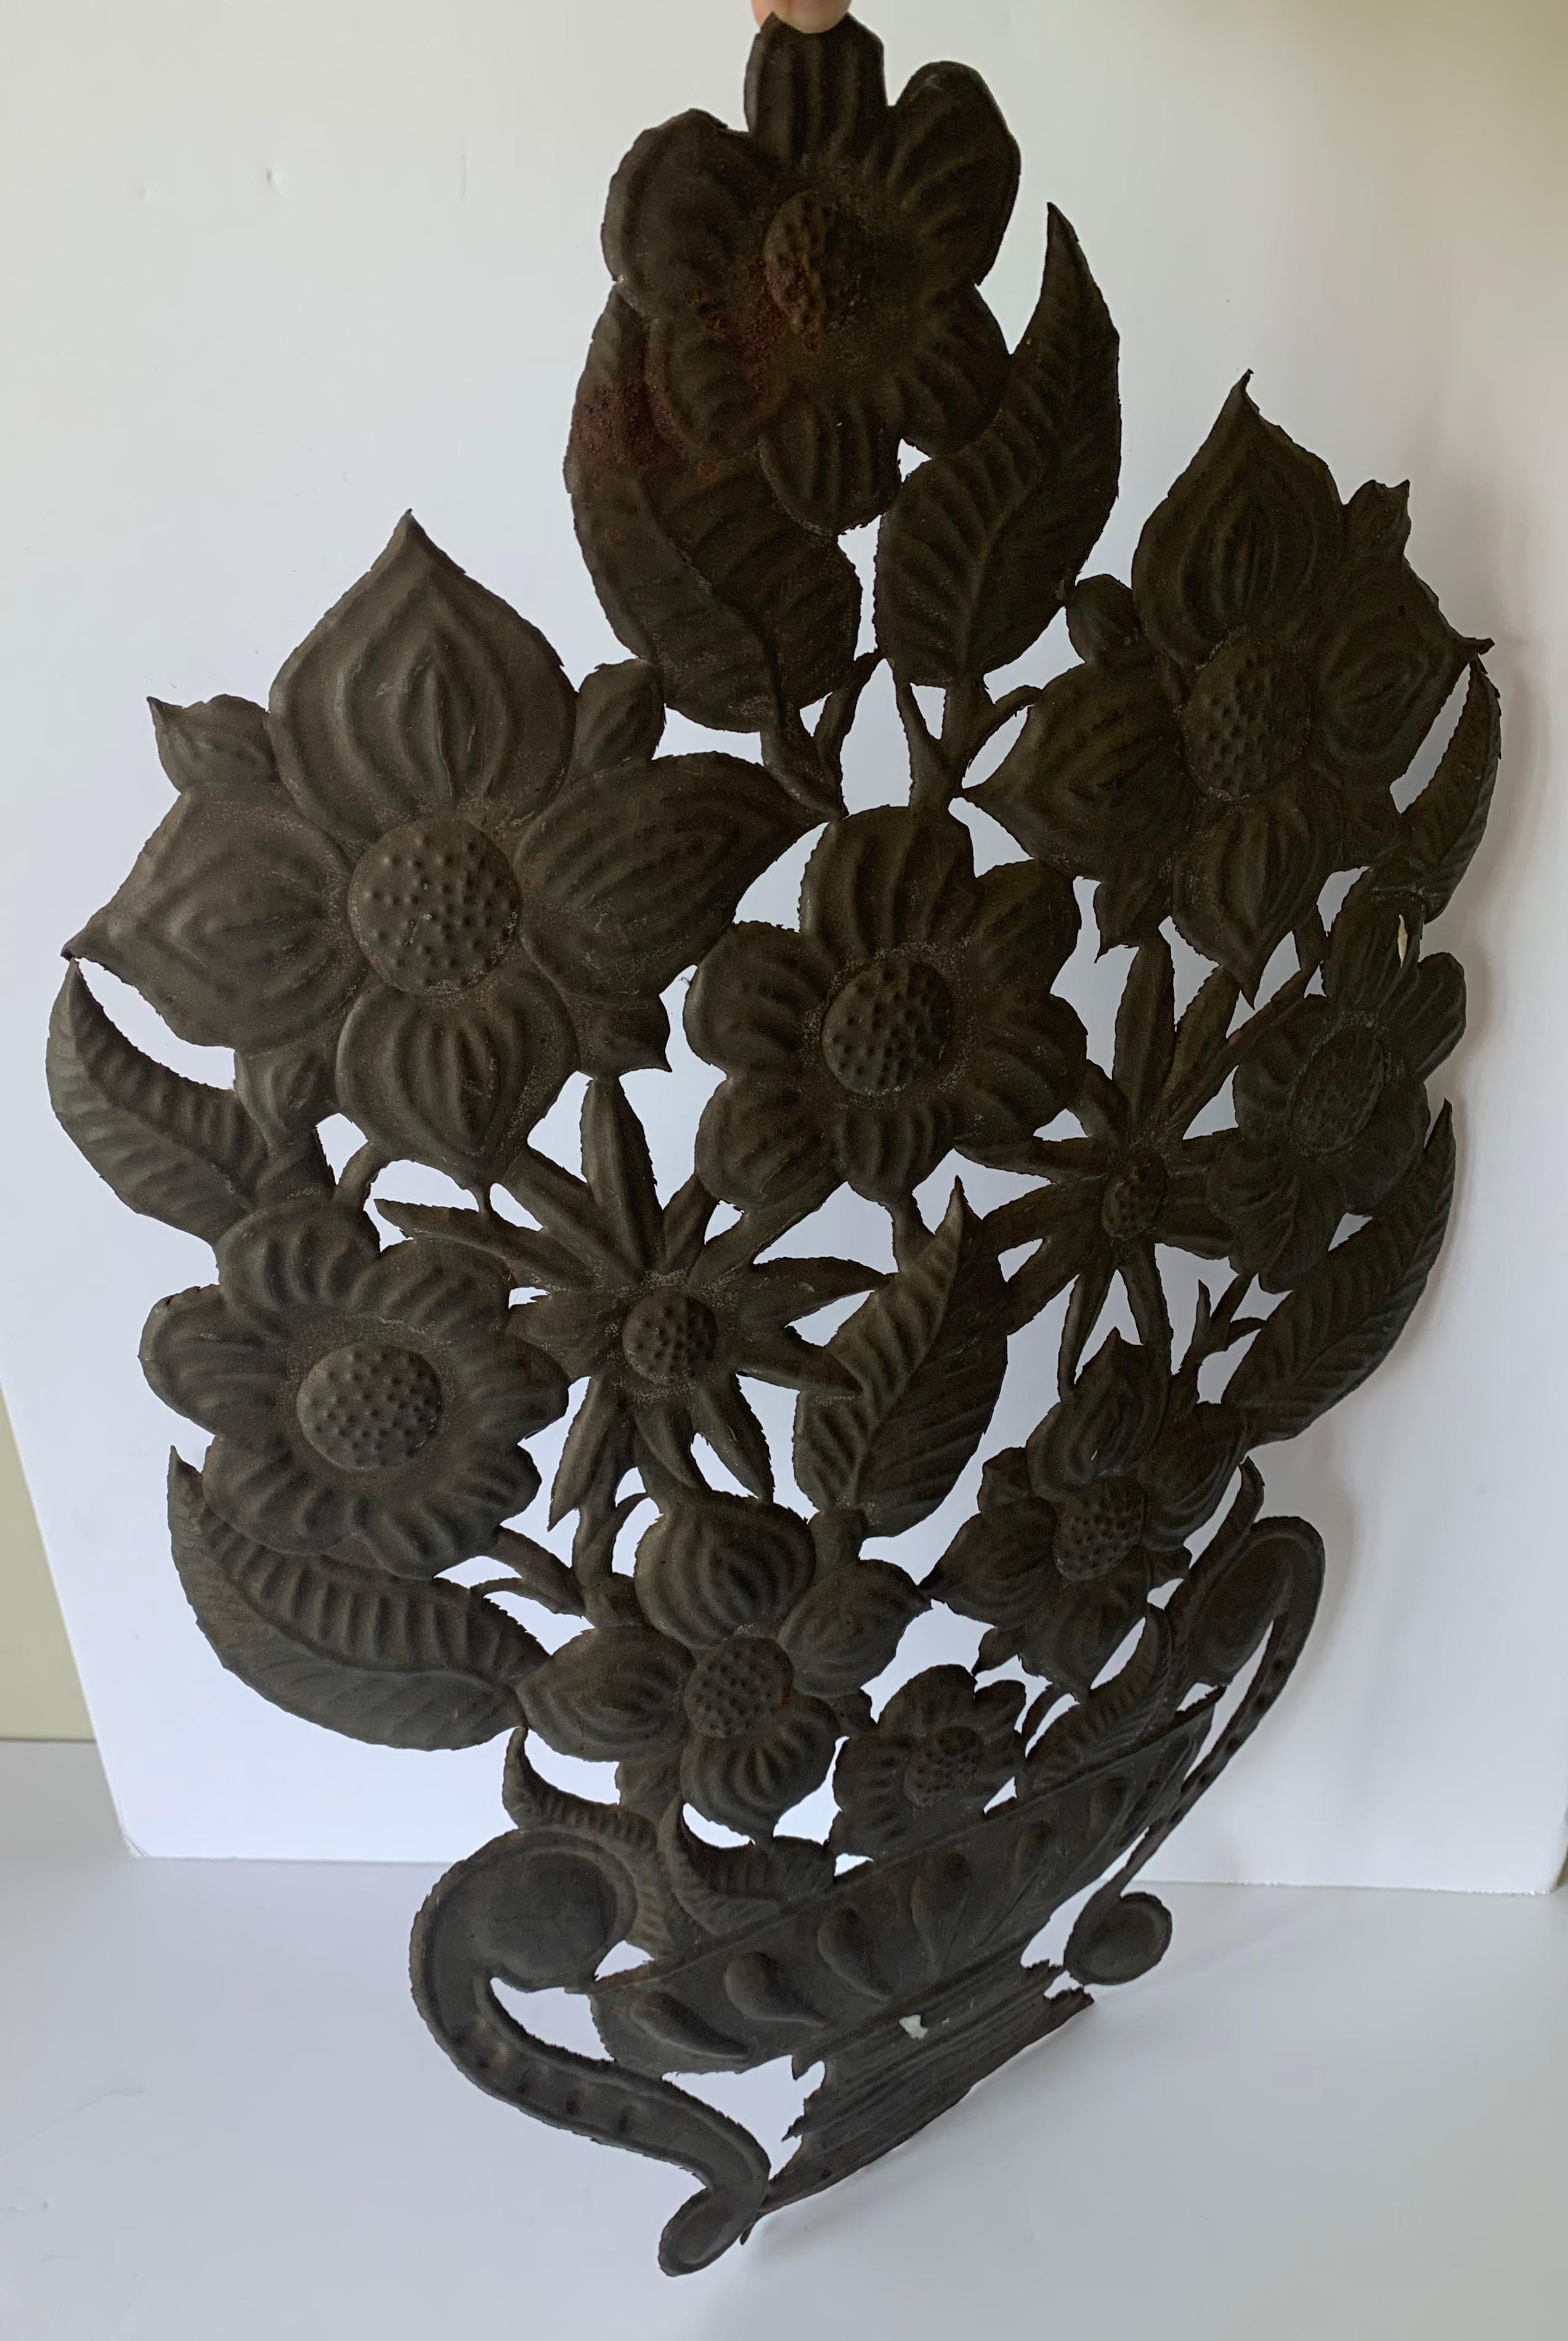 Mid-20th Century Mexican Tin Flower Wall Hanging Decoration